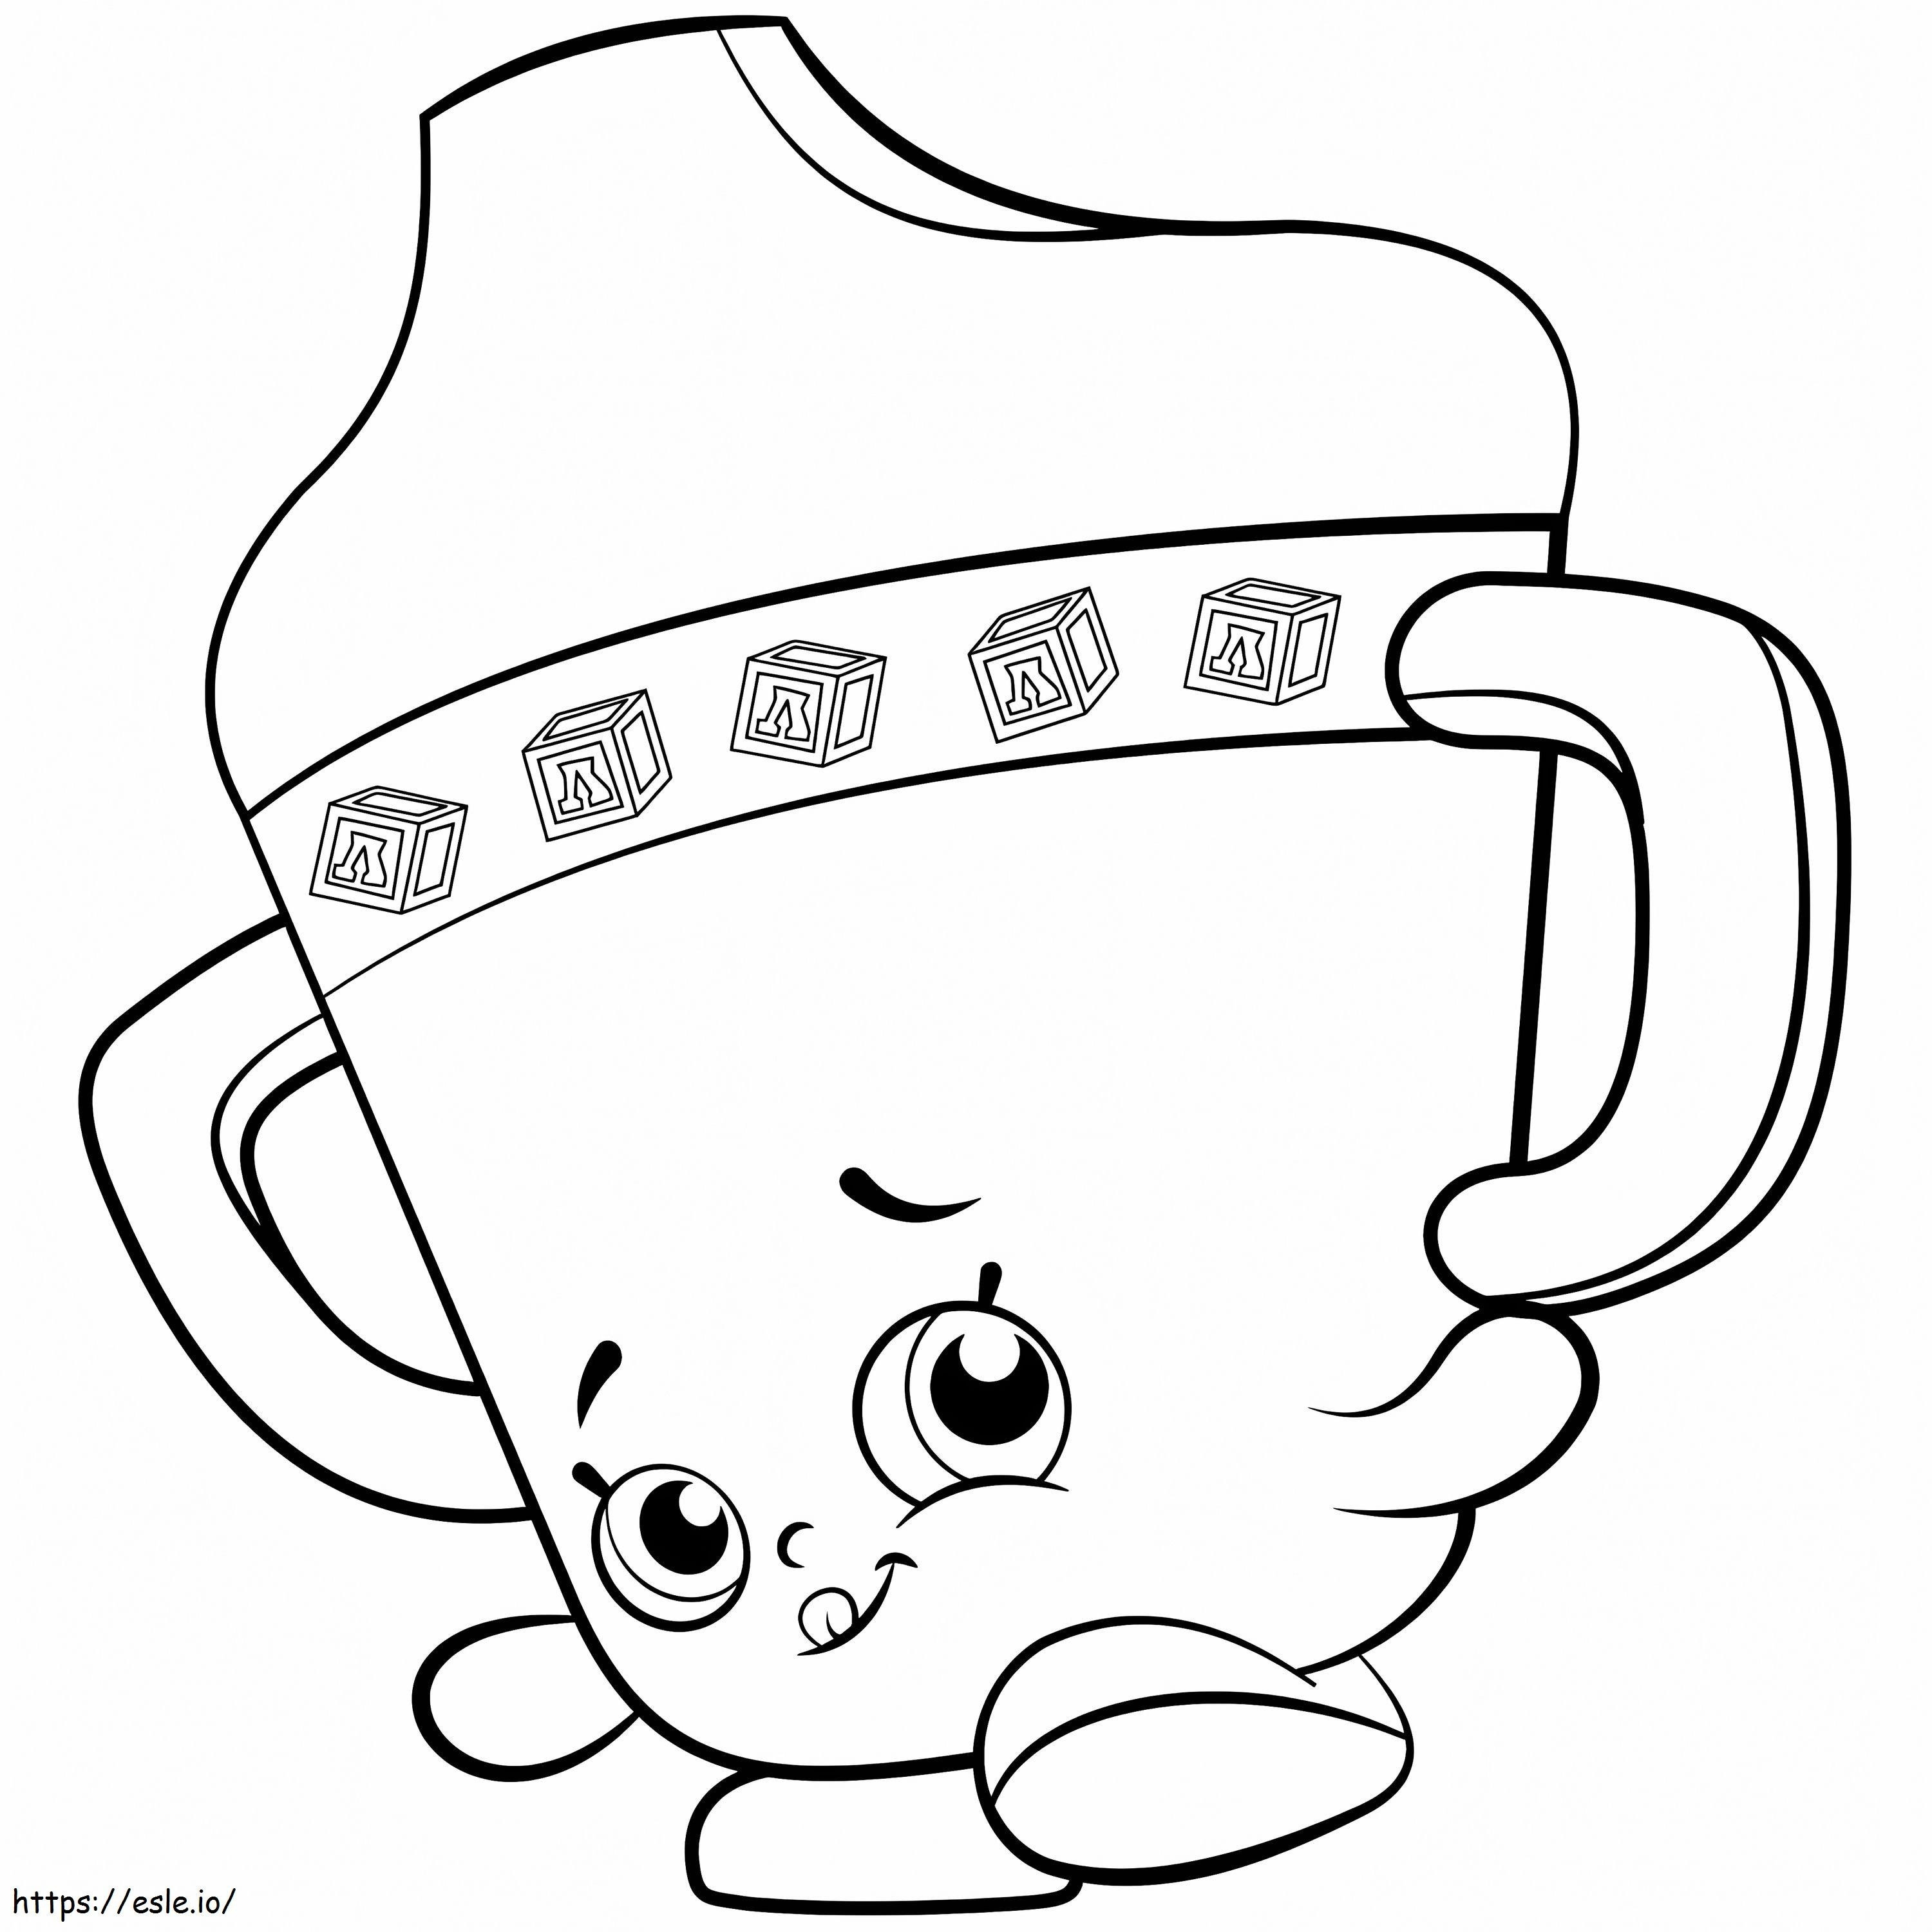 Sippy Sips Baby Shopkins coloring page